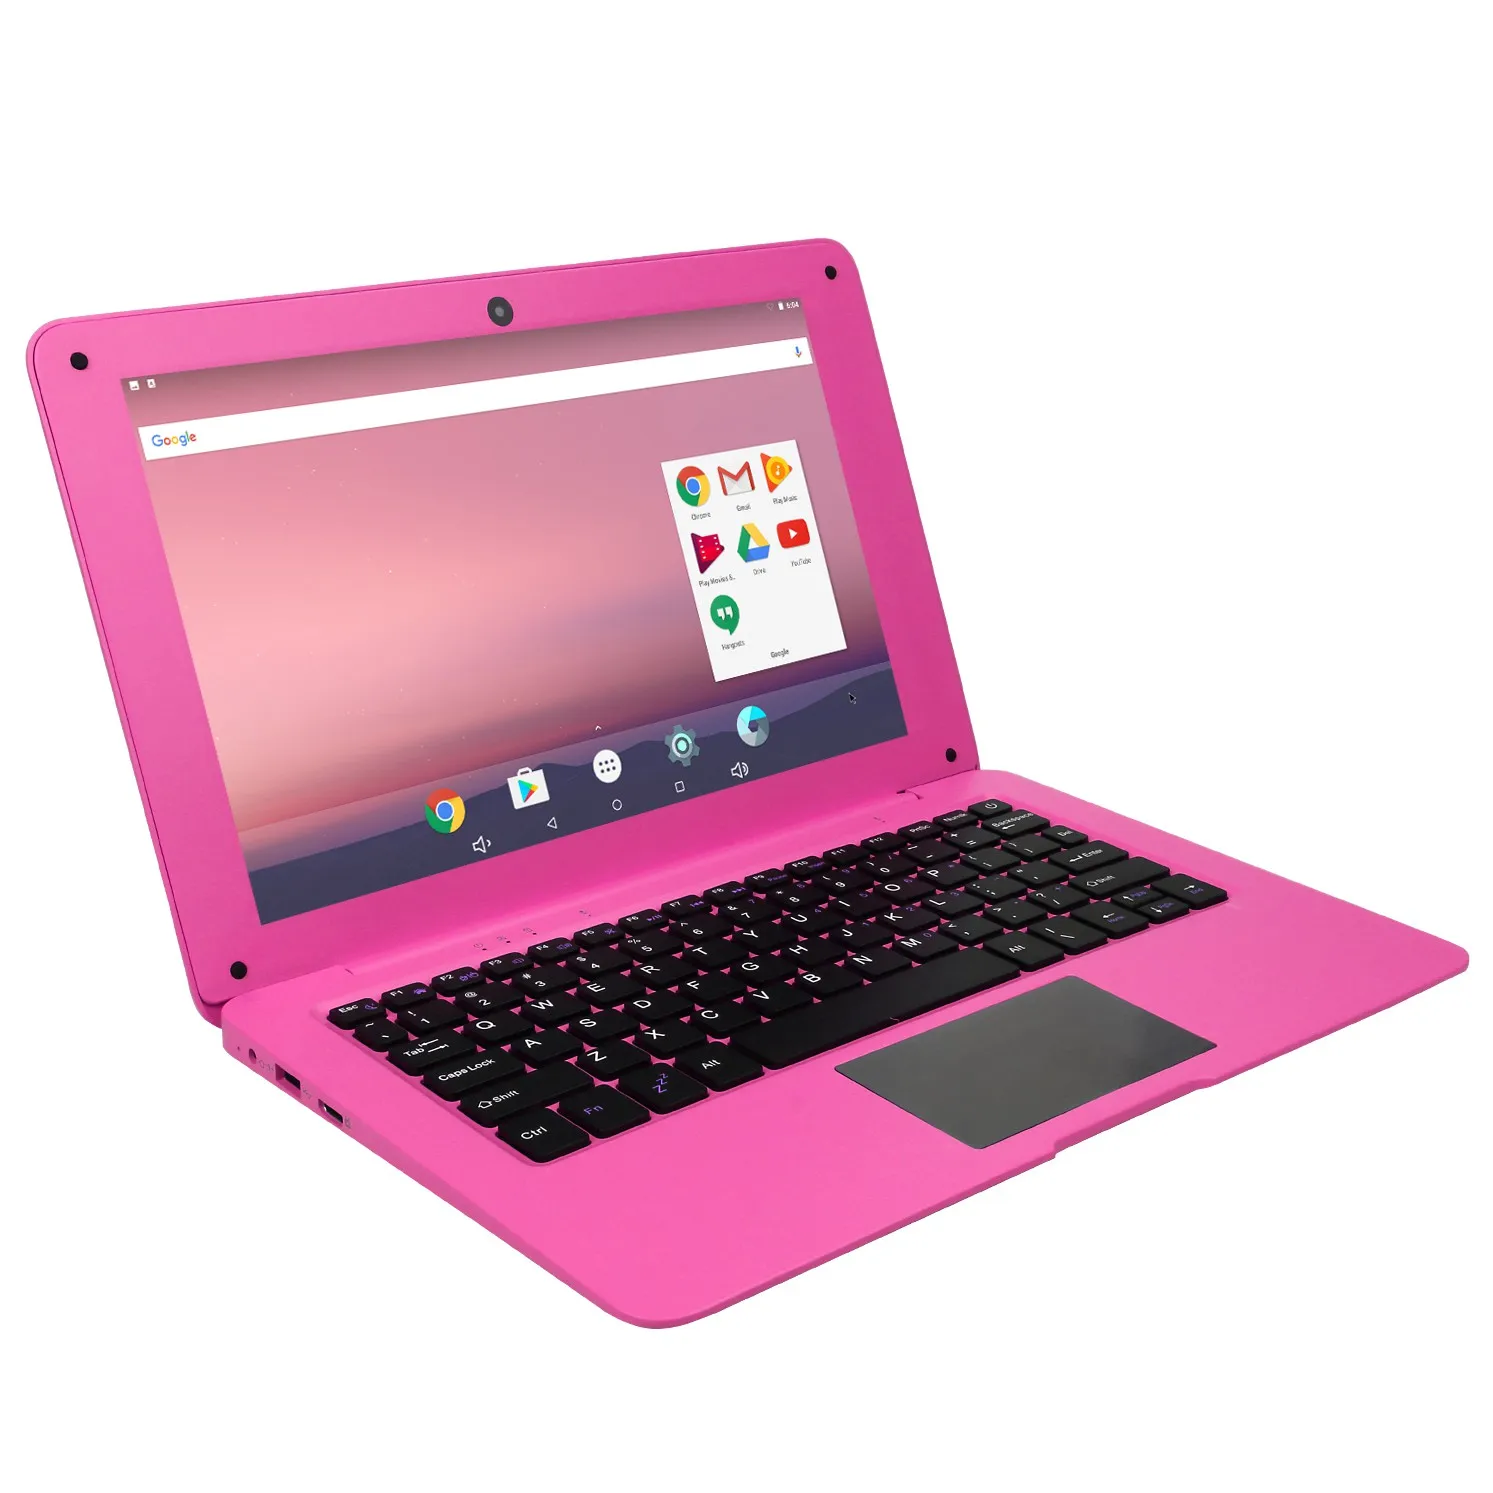 

10.1 Inch Online Class Kids Android Quad Core Gaming Notebook Laptops, White, black, pink, blue plastic case